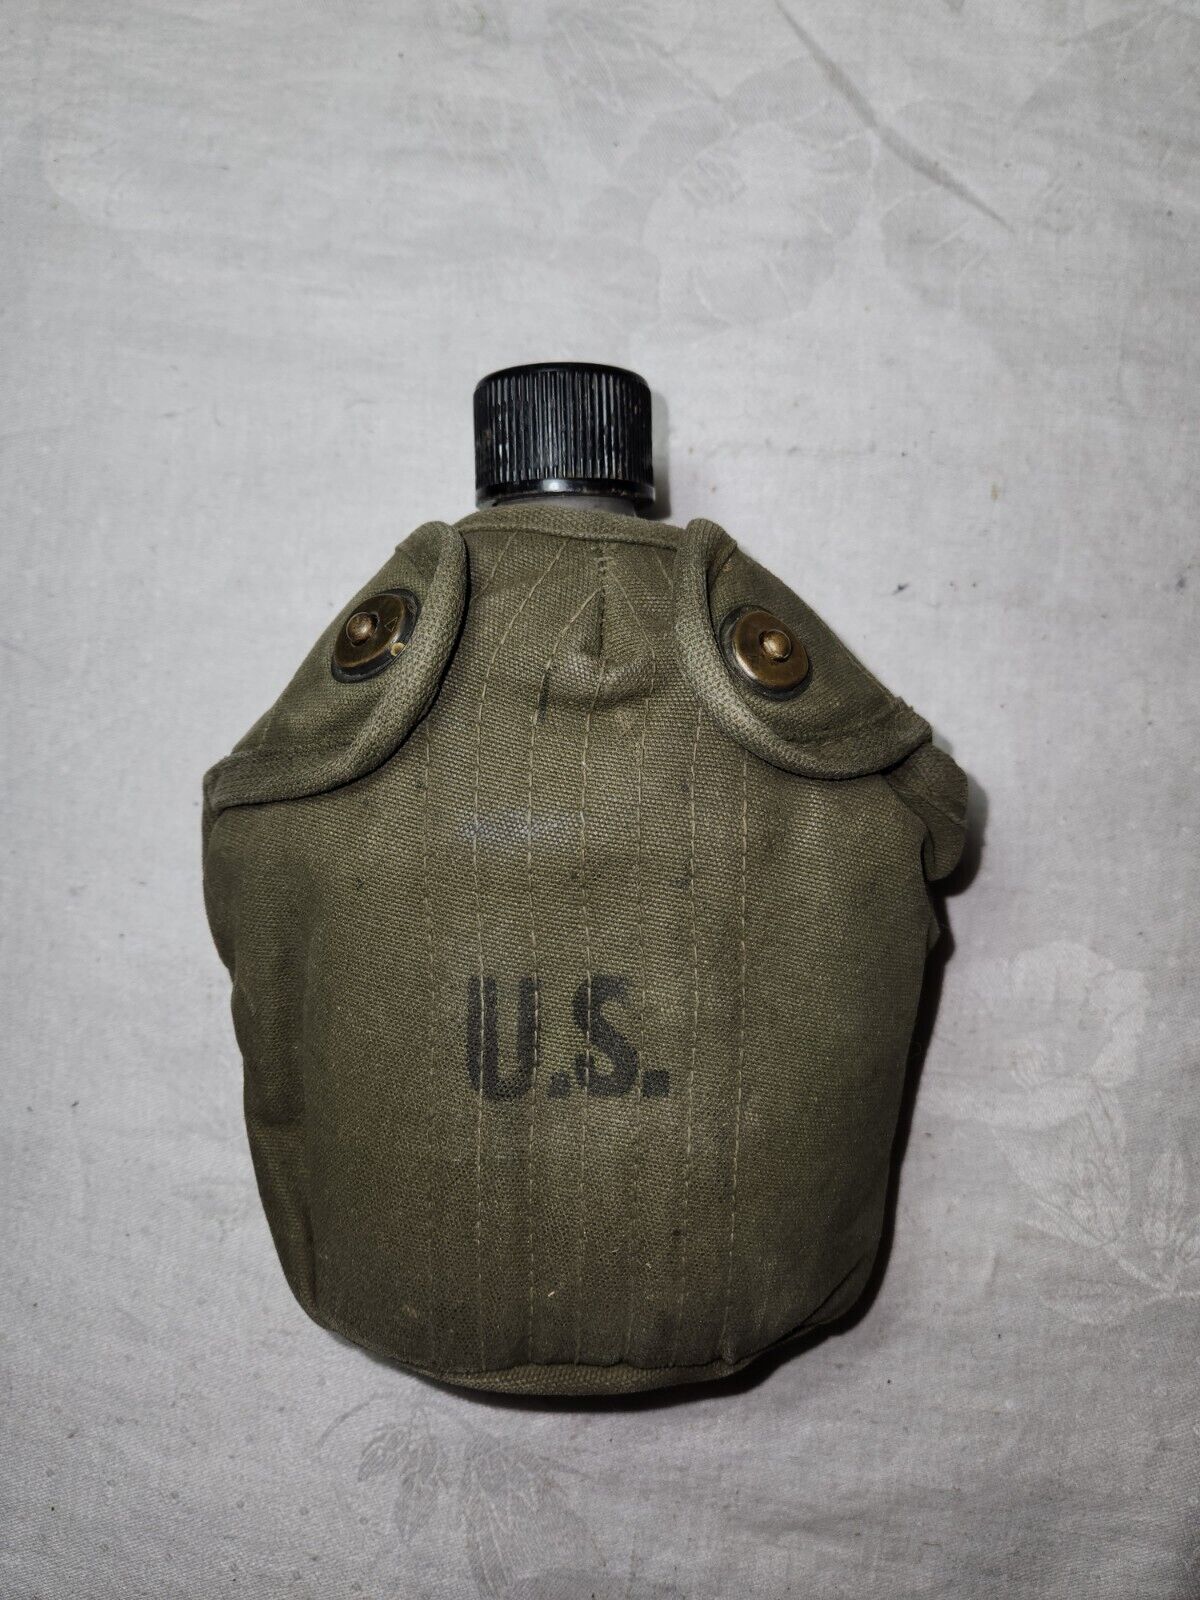 Vintage 1974 Vietnam War USMC U.S. Army Canteen and Cover 1964